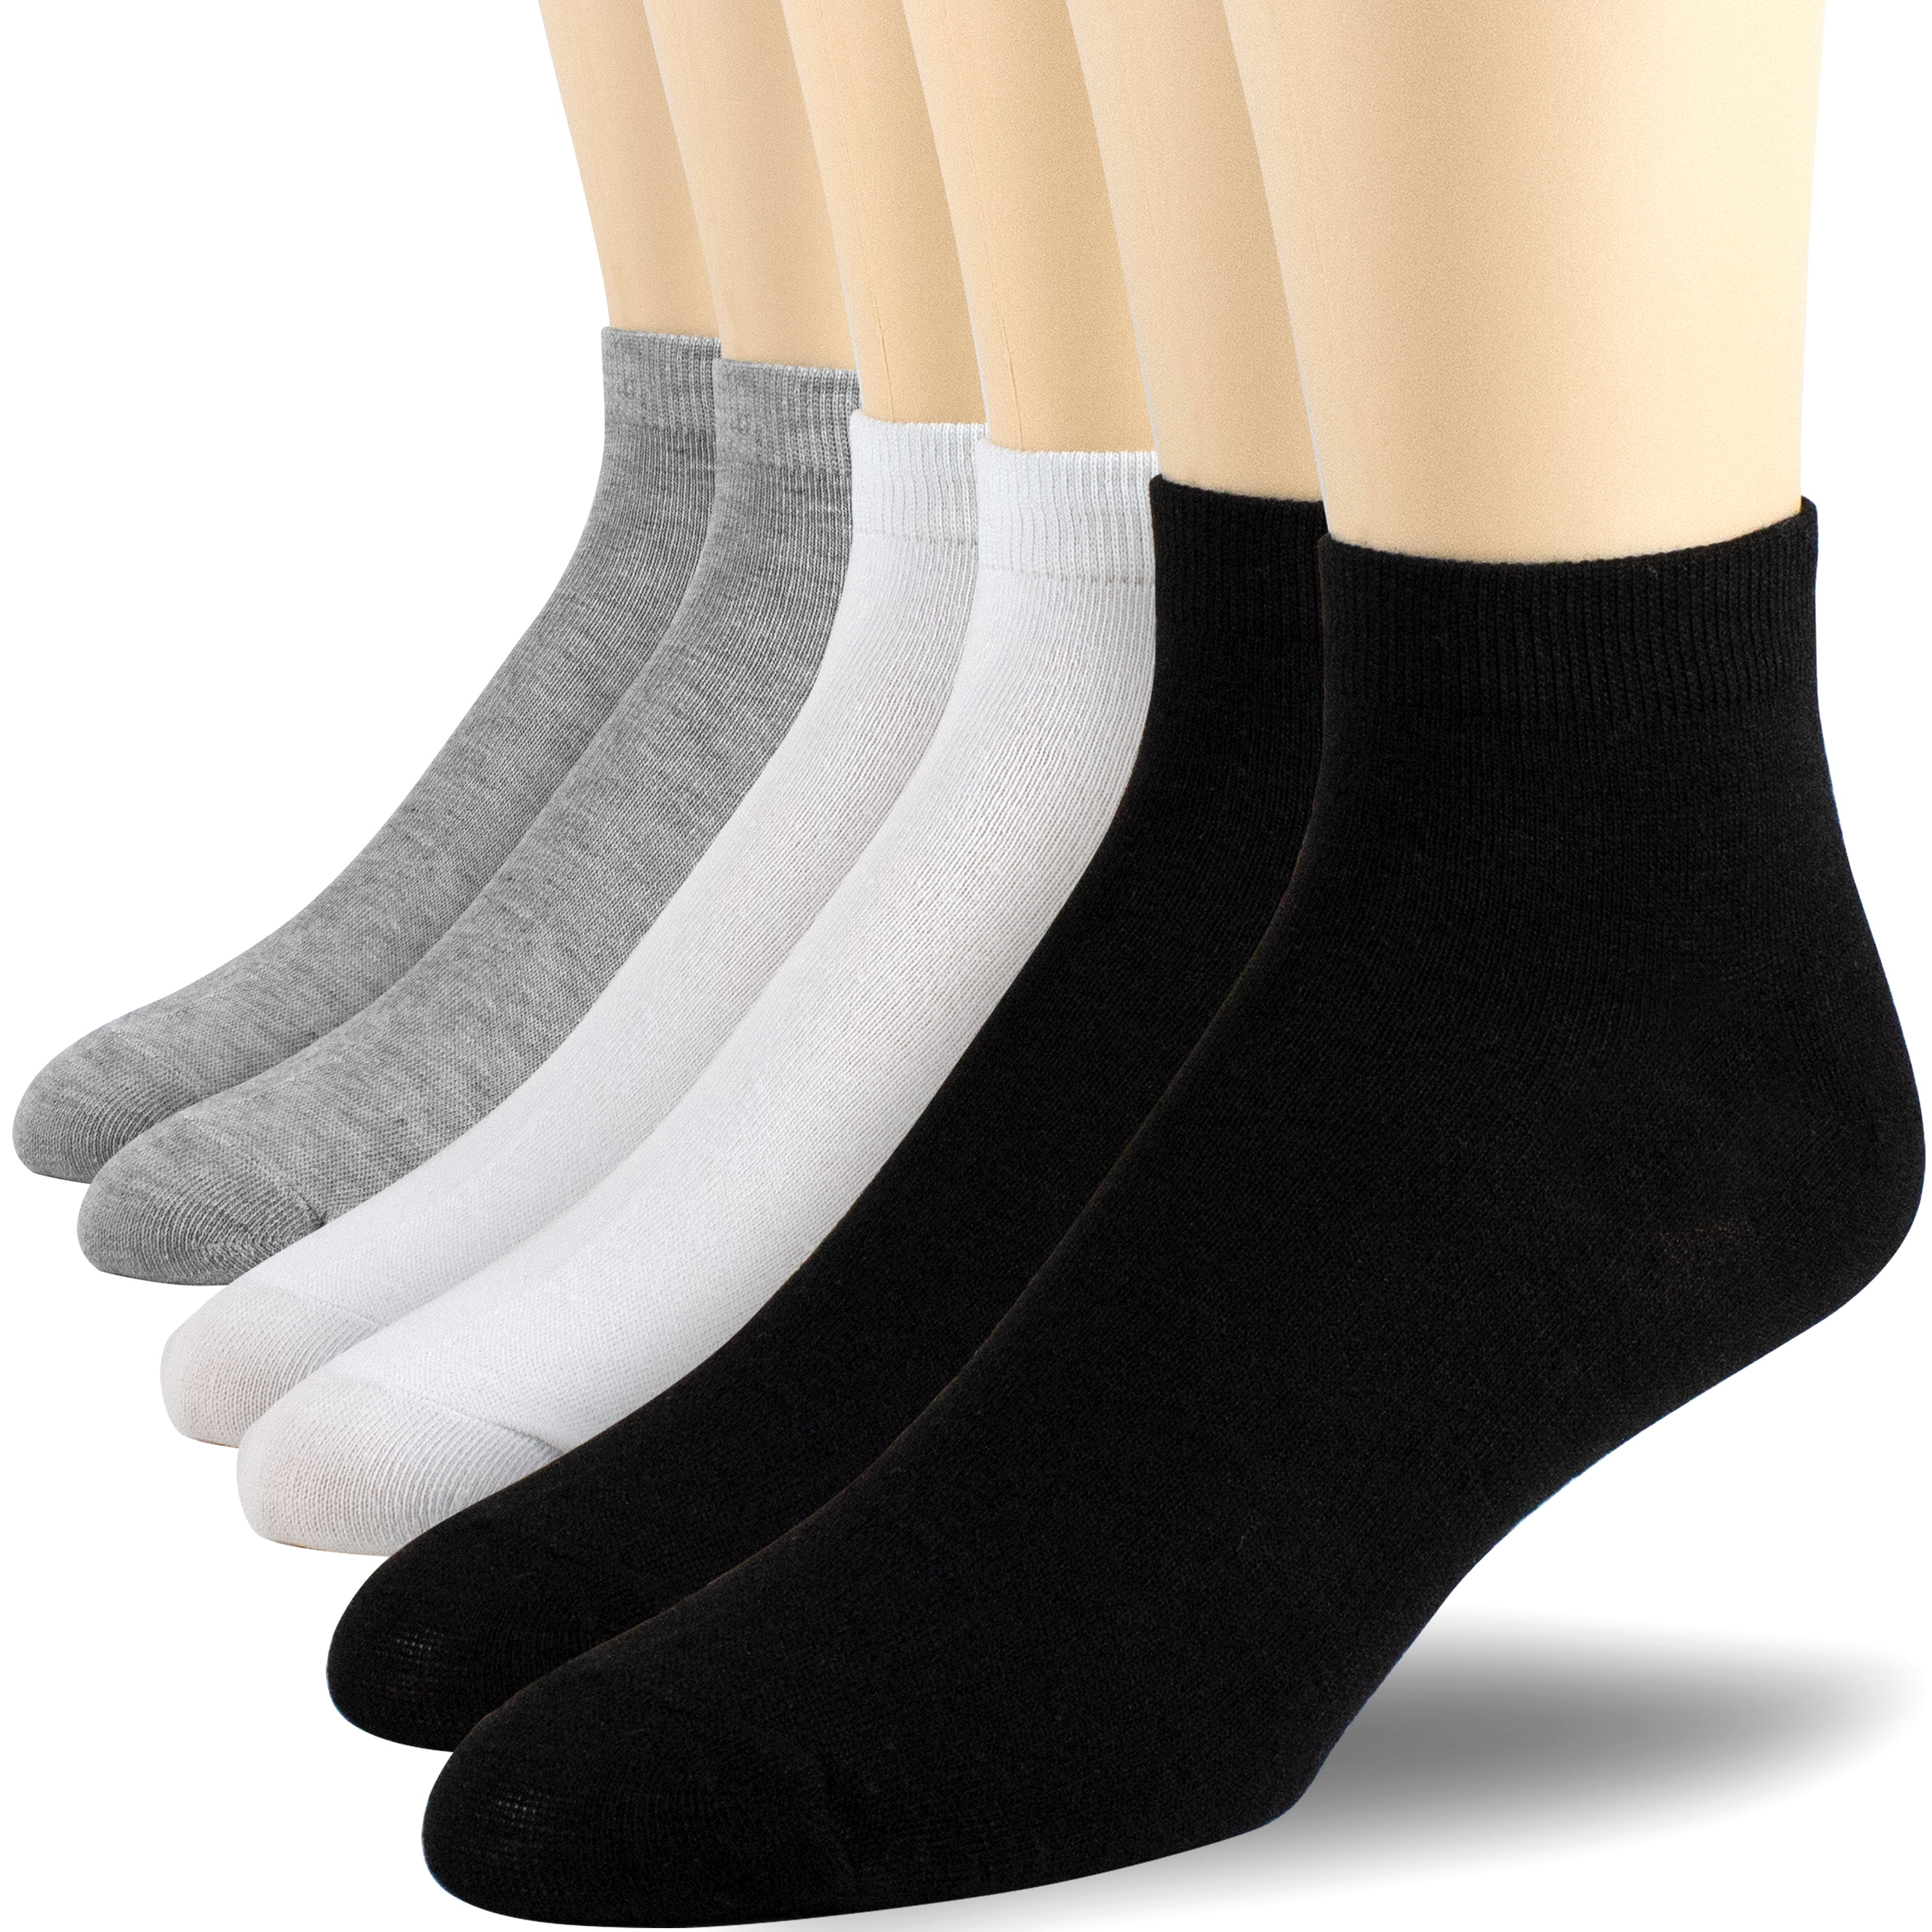 9-11 10-13 Quality Casual Cotton Spandex Low Cut White Comfort Socks 3 6 Pairs 